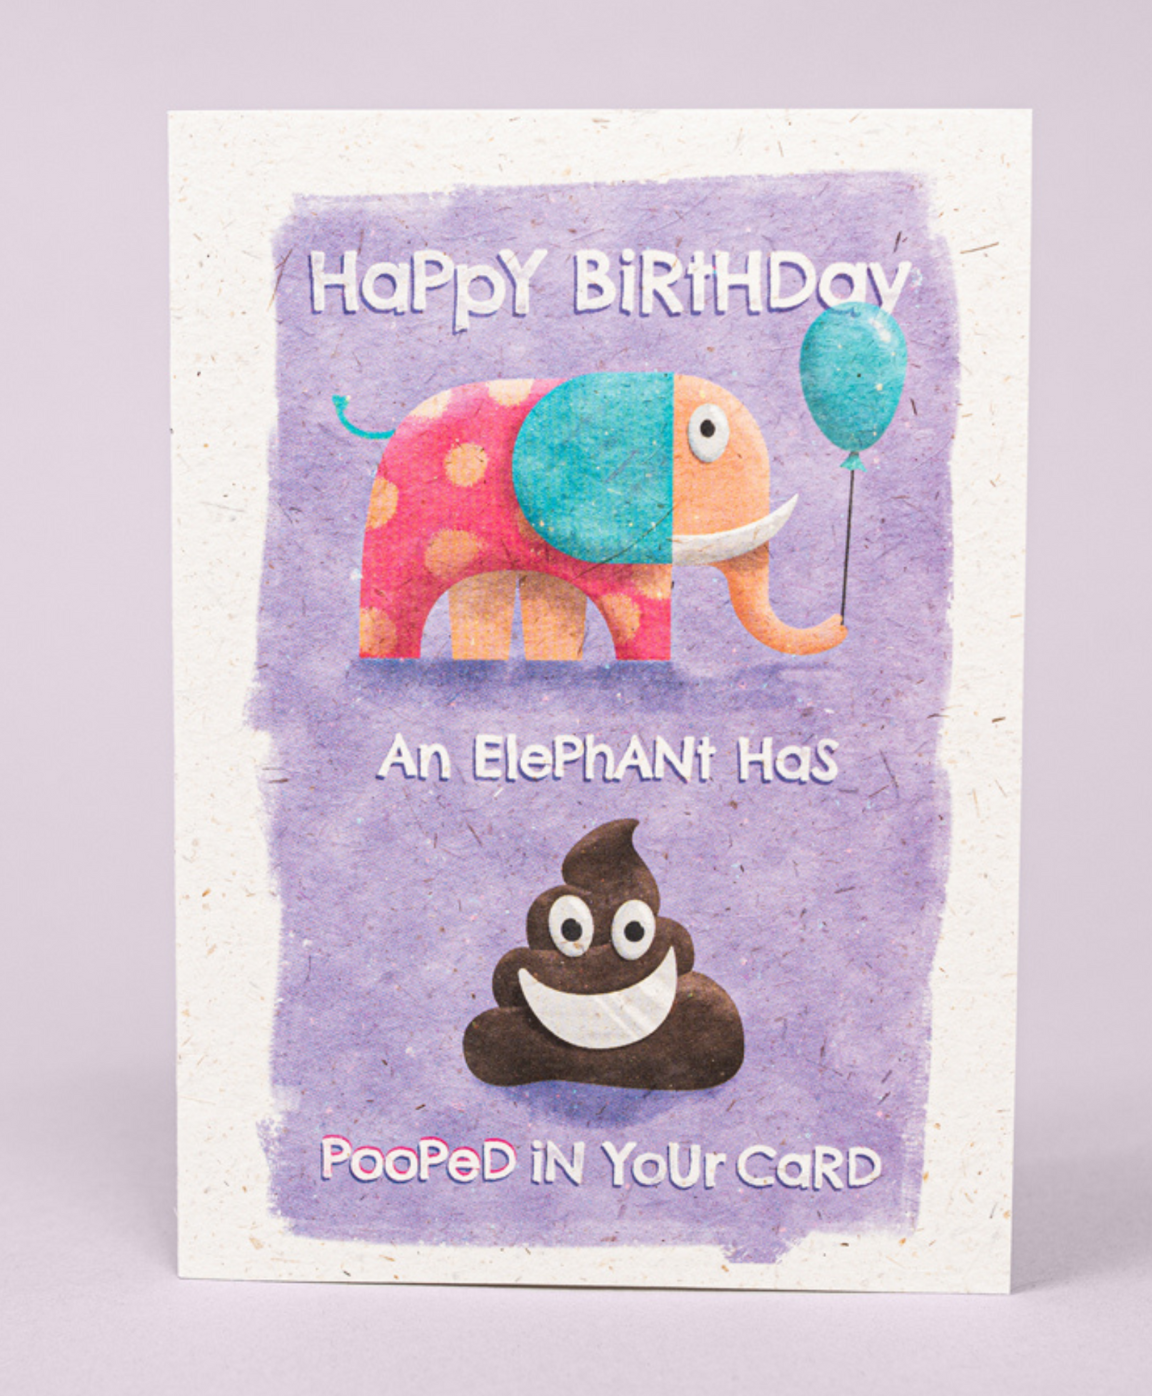 Happy Birthday An Elephant Has Pooped in Your Card – willsow